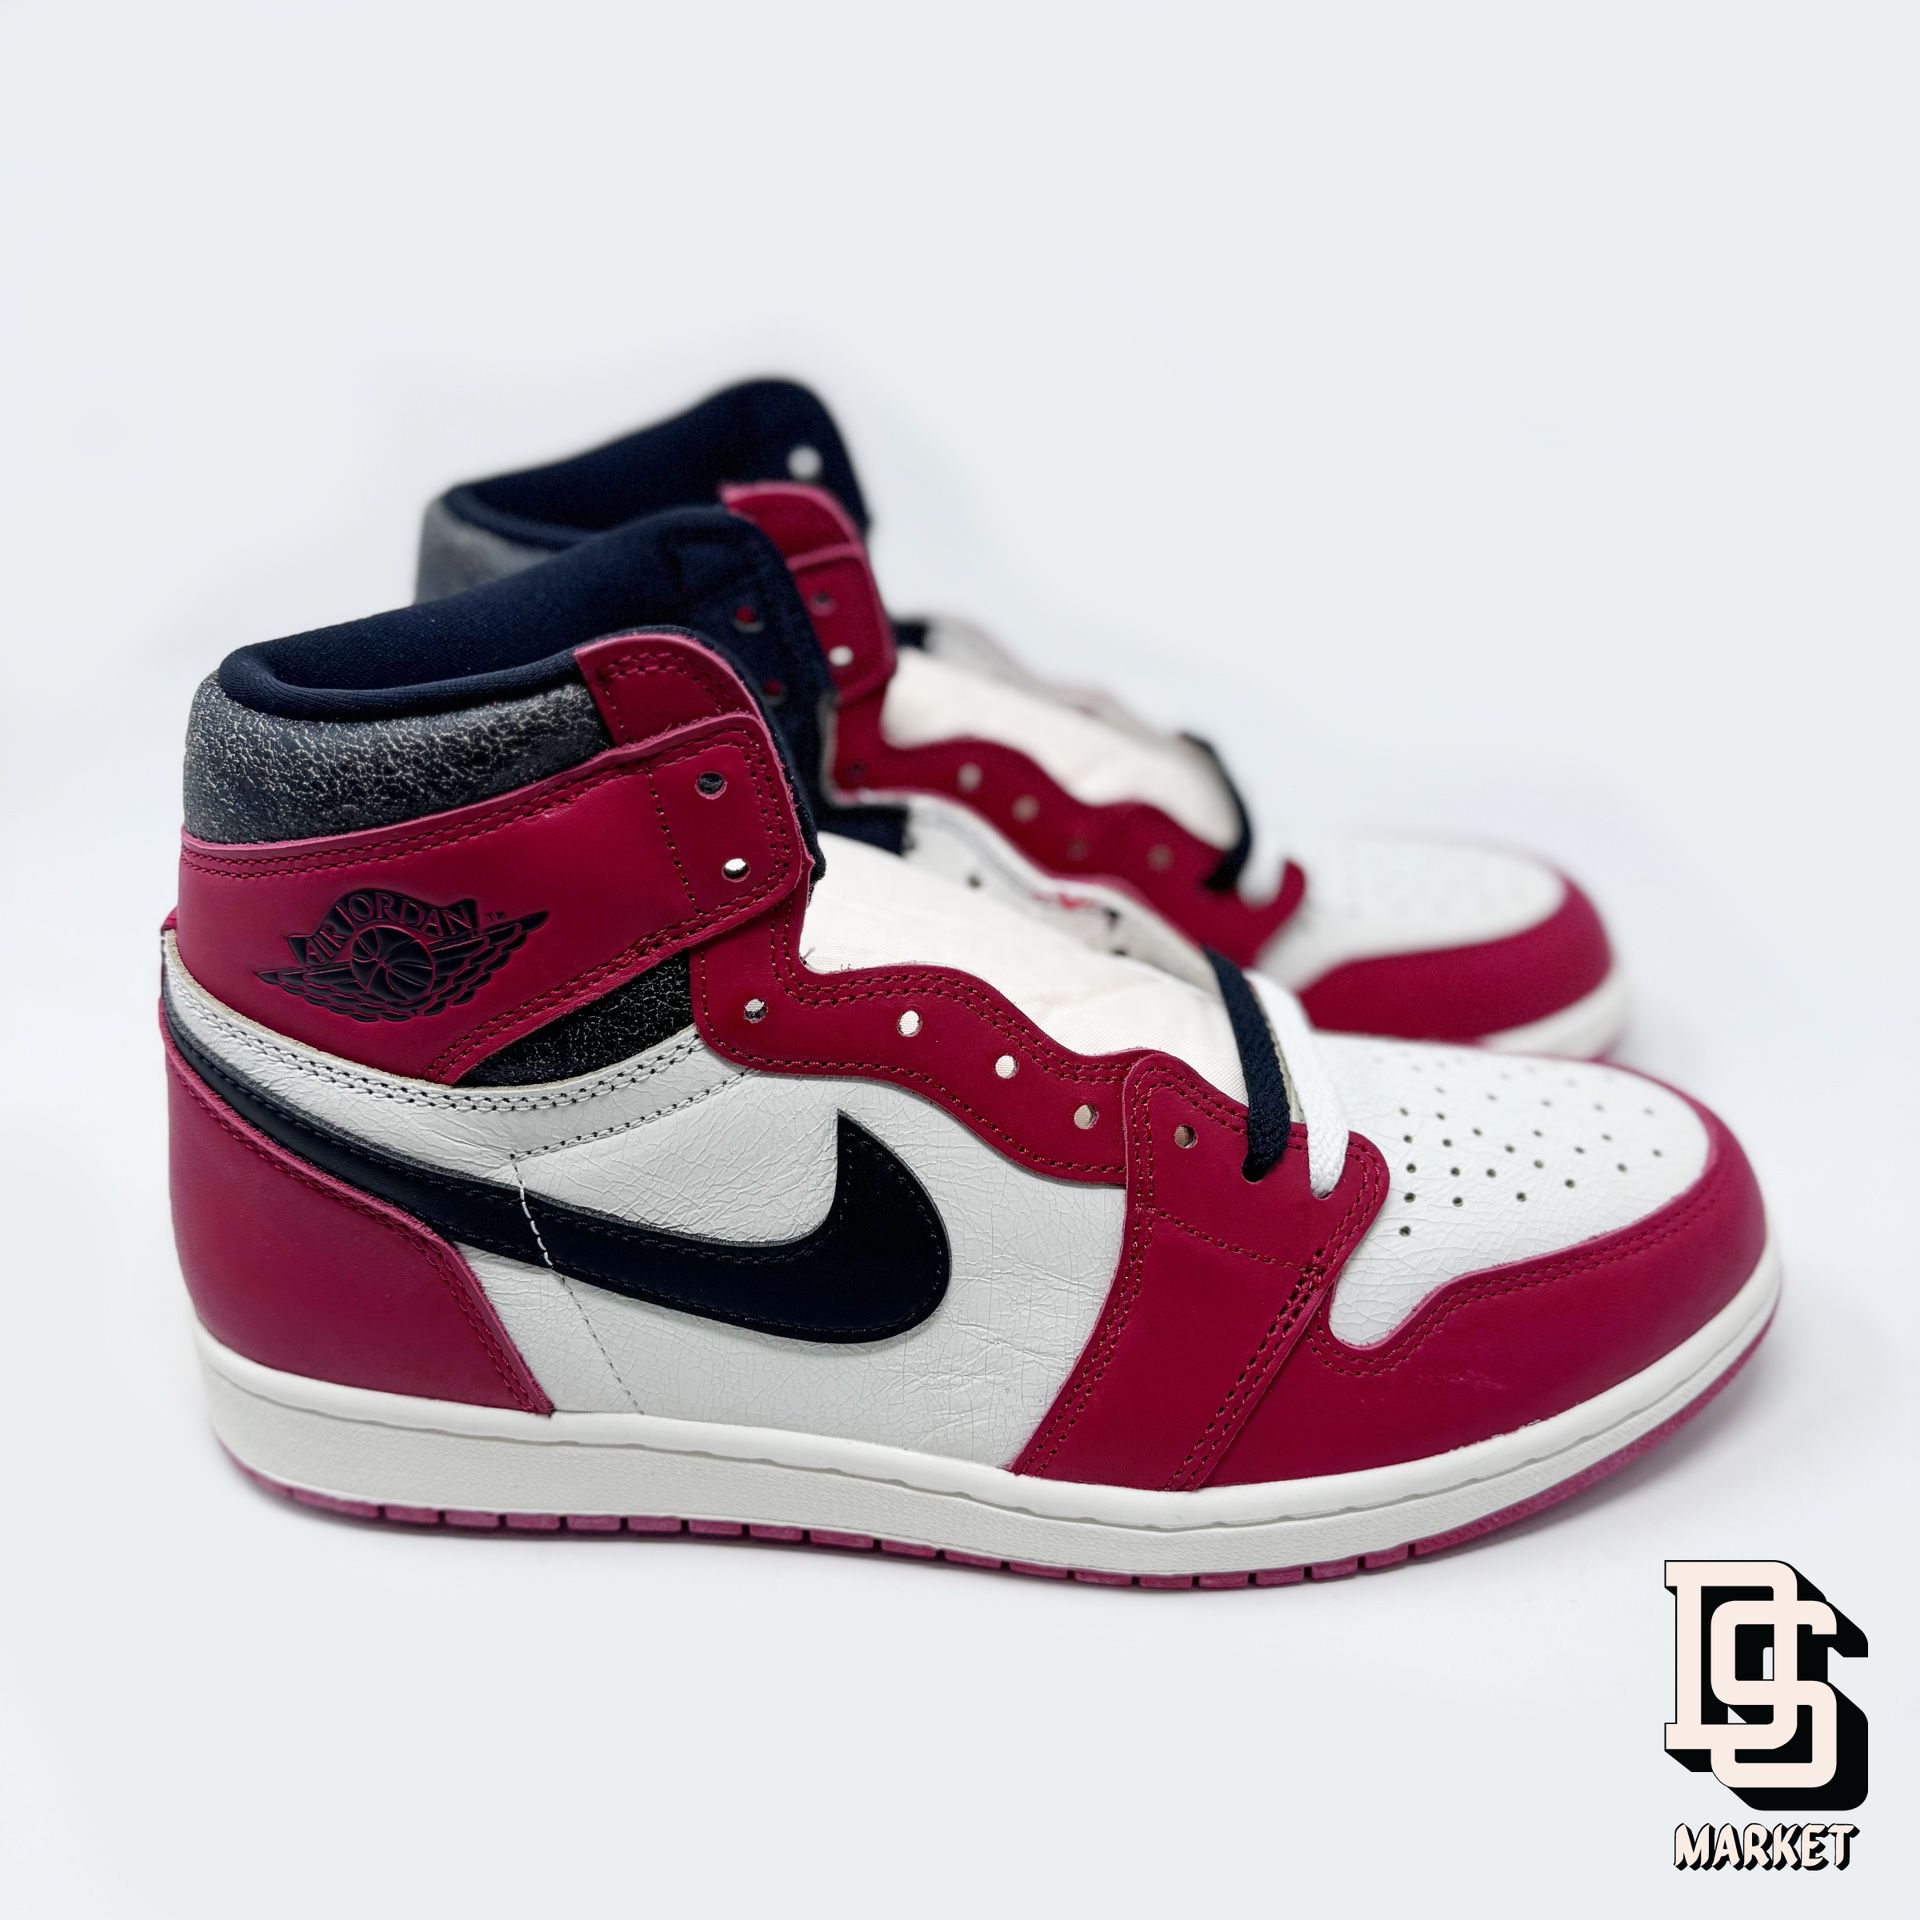 DS AIR JORDAN 1 CHICAGO LOST AND FOUND 11.5 